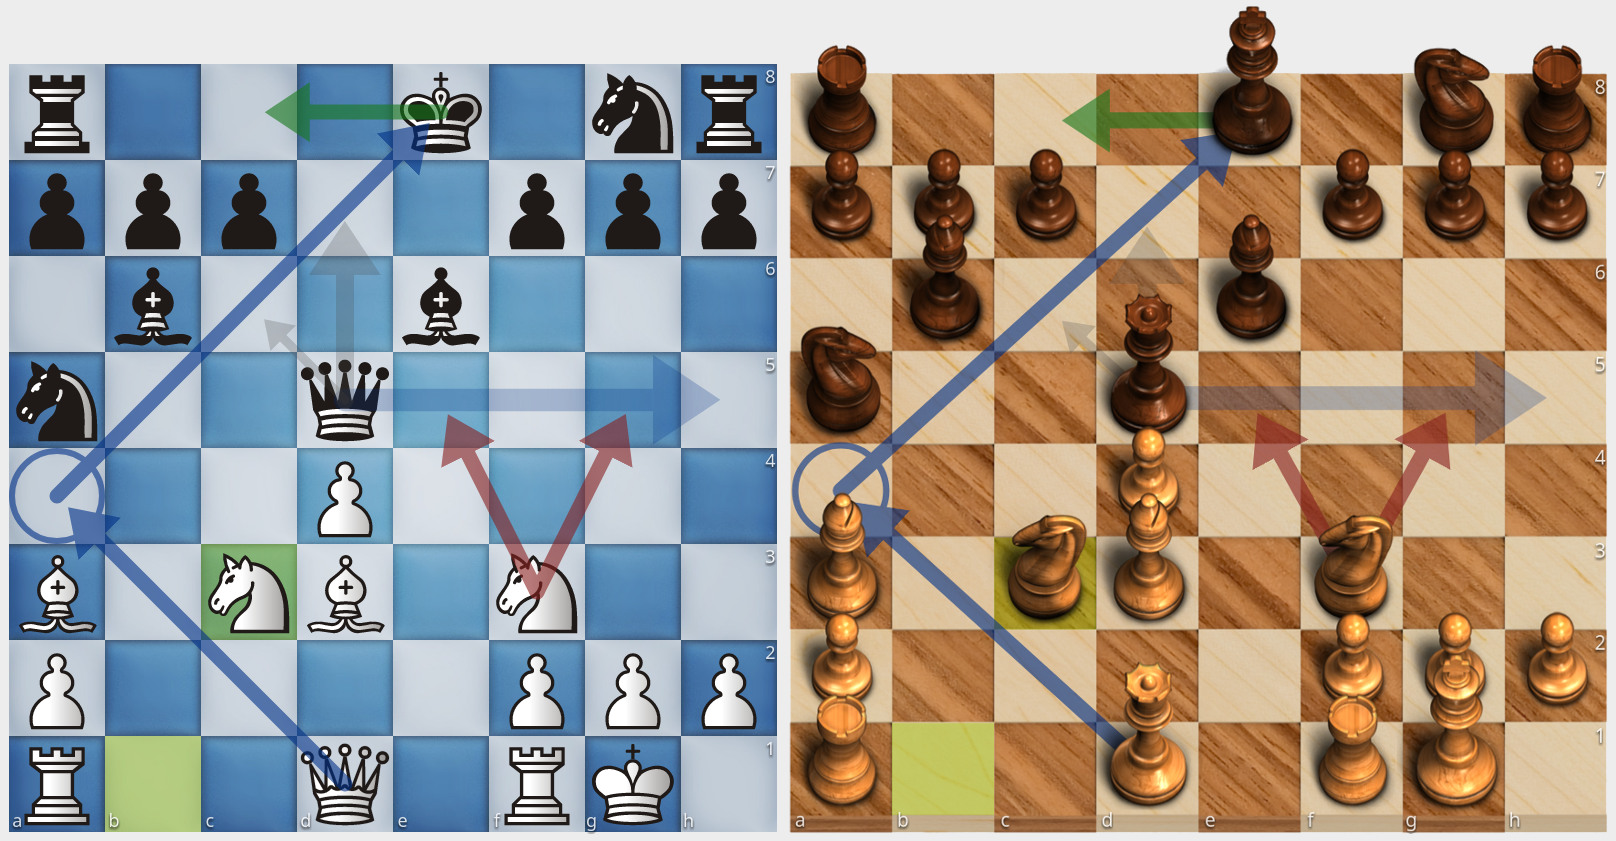 tuichess - PGN reader and analysis board web app : r/chess